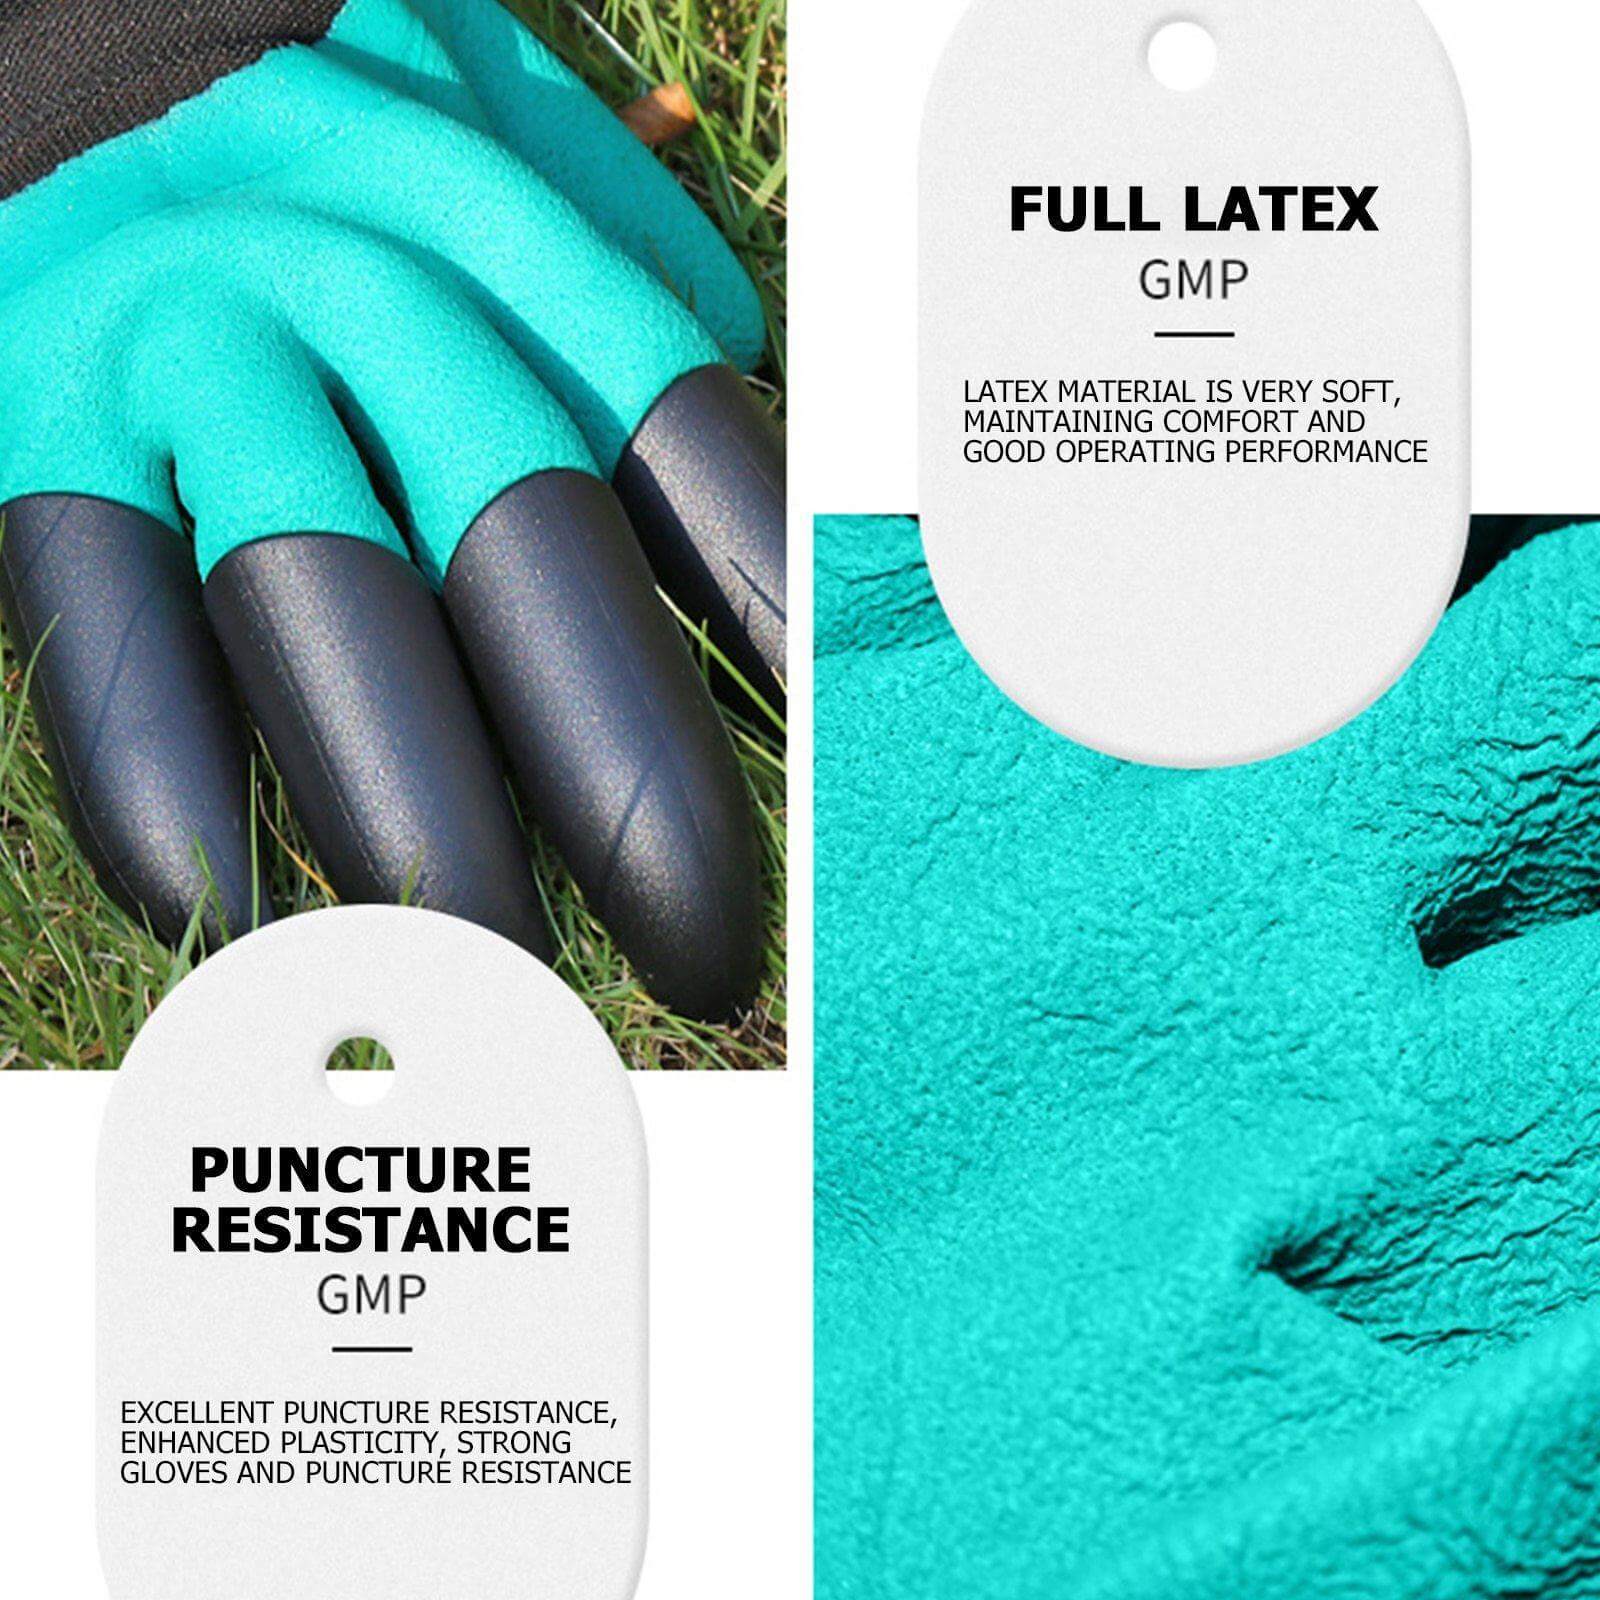 Garden Rubber Gloves with Fingertips Claws